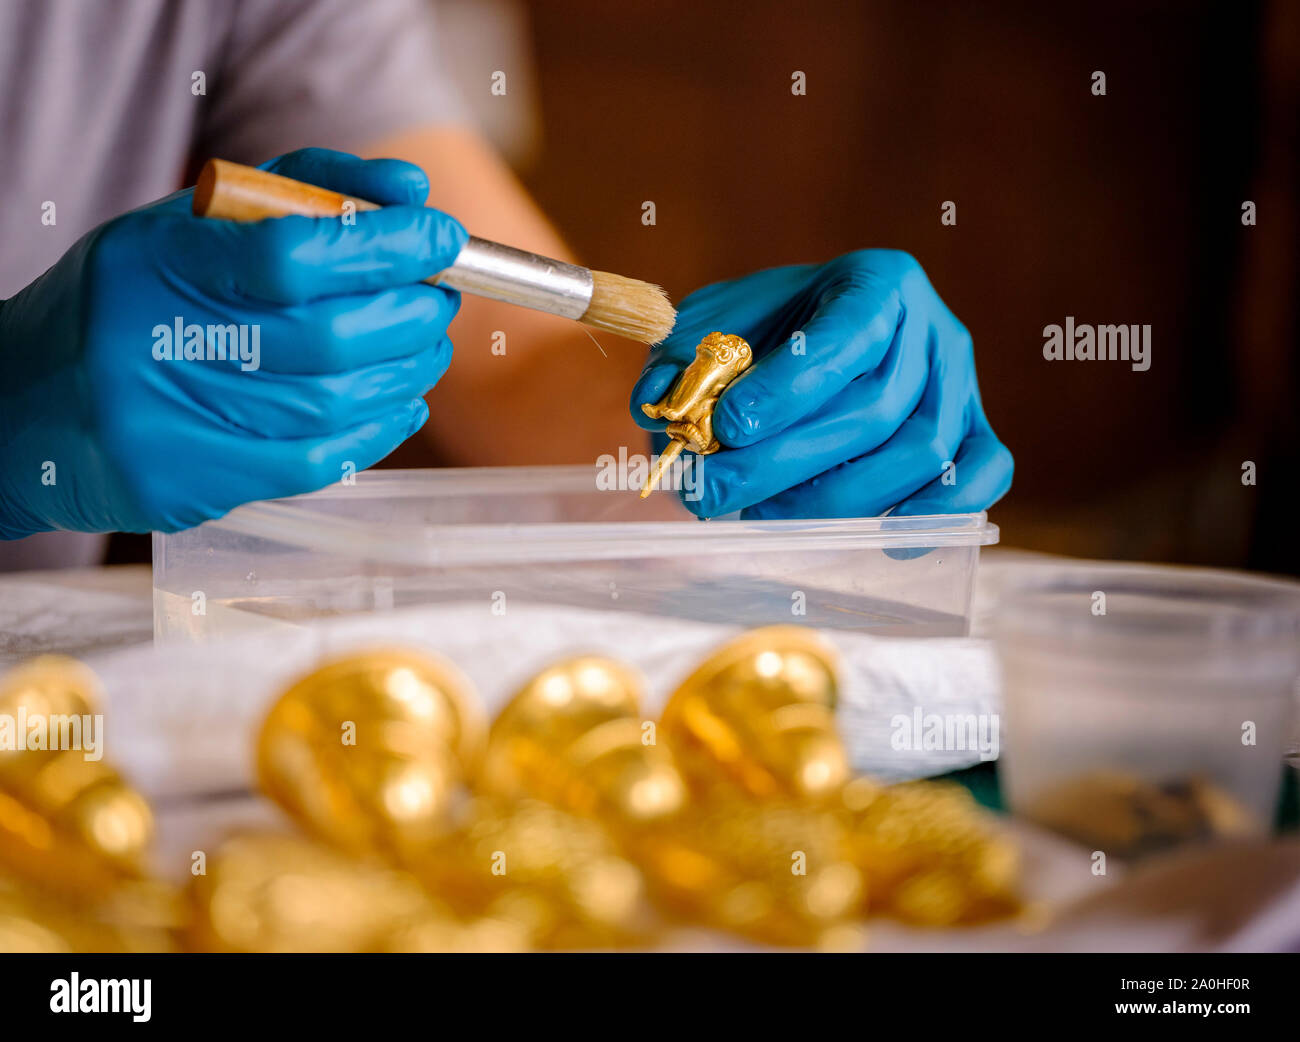 Brighton, East Sussex, UK. 20 September 2019.  The finishing touches are made to a new exhibition opening at the Royal Pavilion in Brighton. The exhibition called ‘A Prince’s Treasure: from Buckingham Palace to the The Royal Pavilion, The Royal Collection Returns To Brighton’ runs for two years. Pictured a conservator cleaning some of the small items.Credit: Jim Holden/Alamy Live News Stock Photo